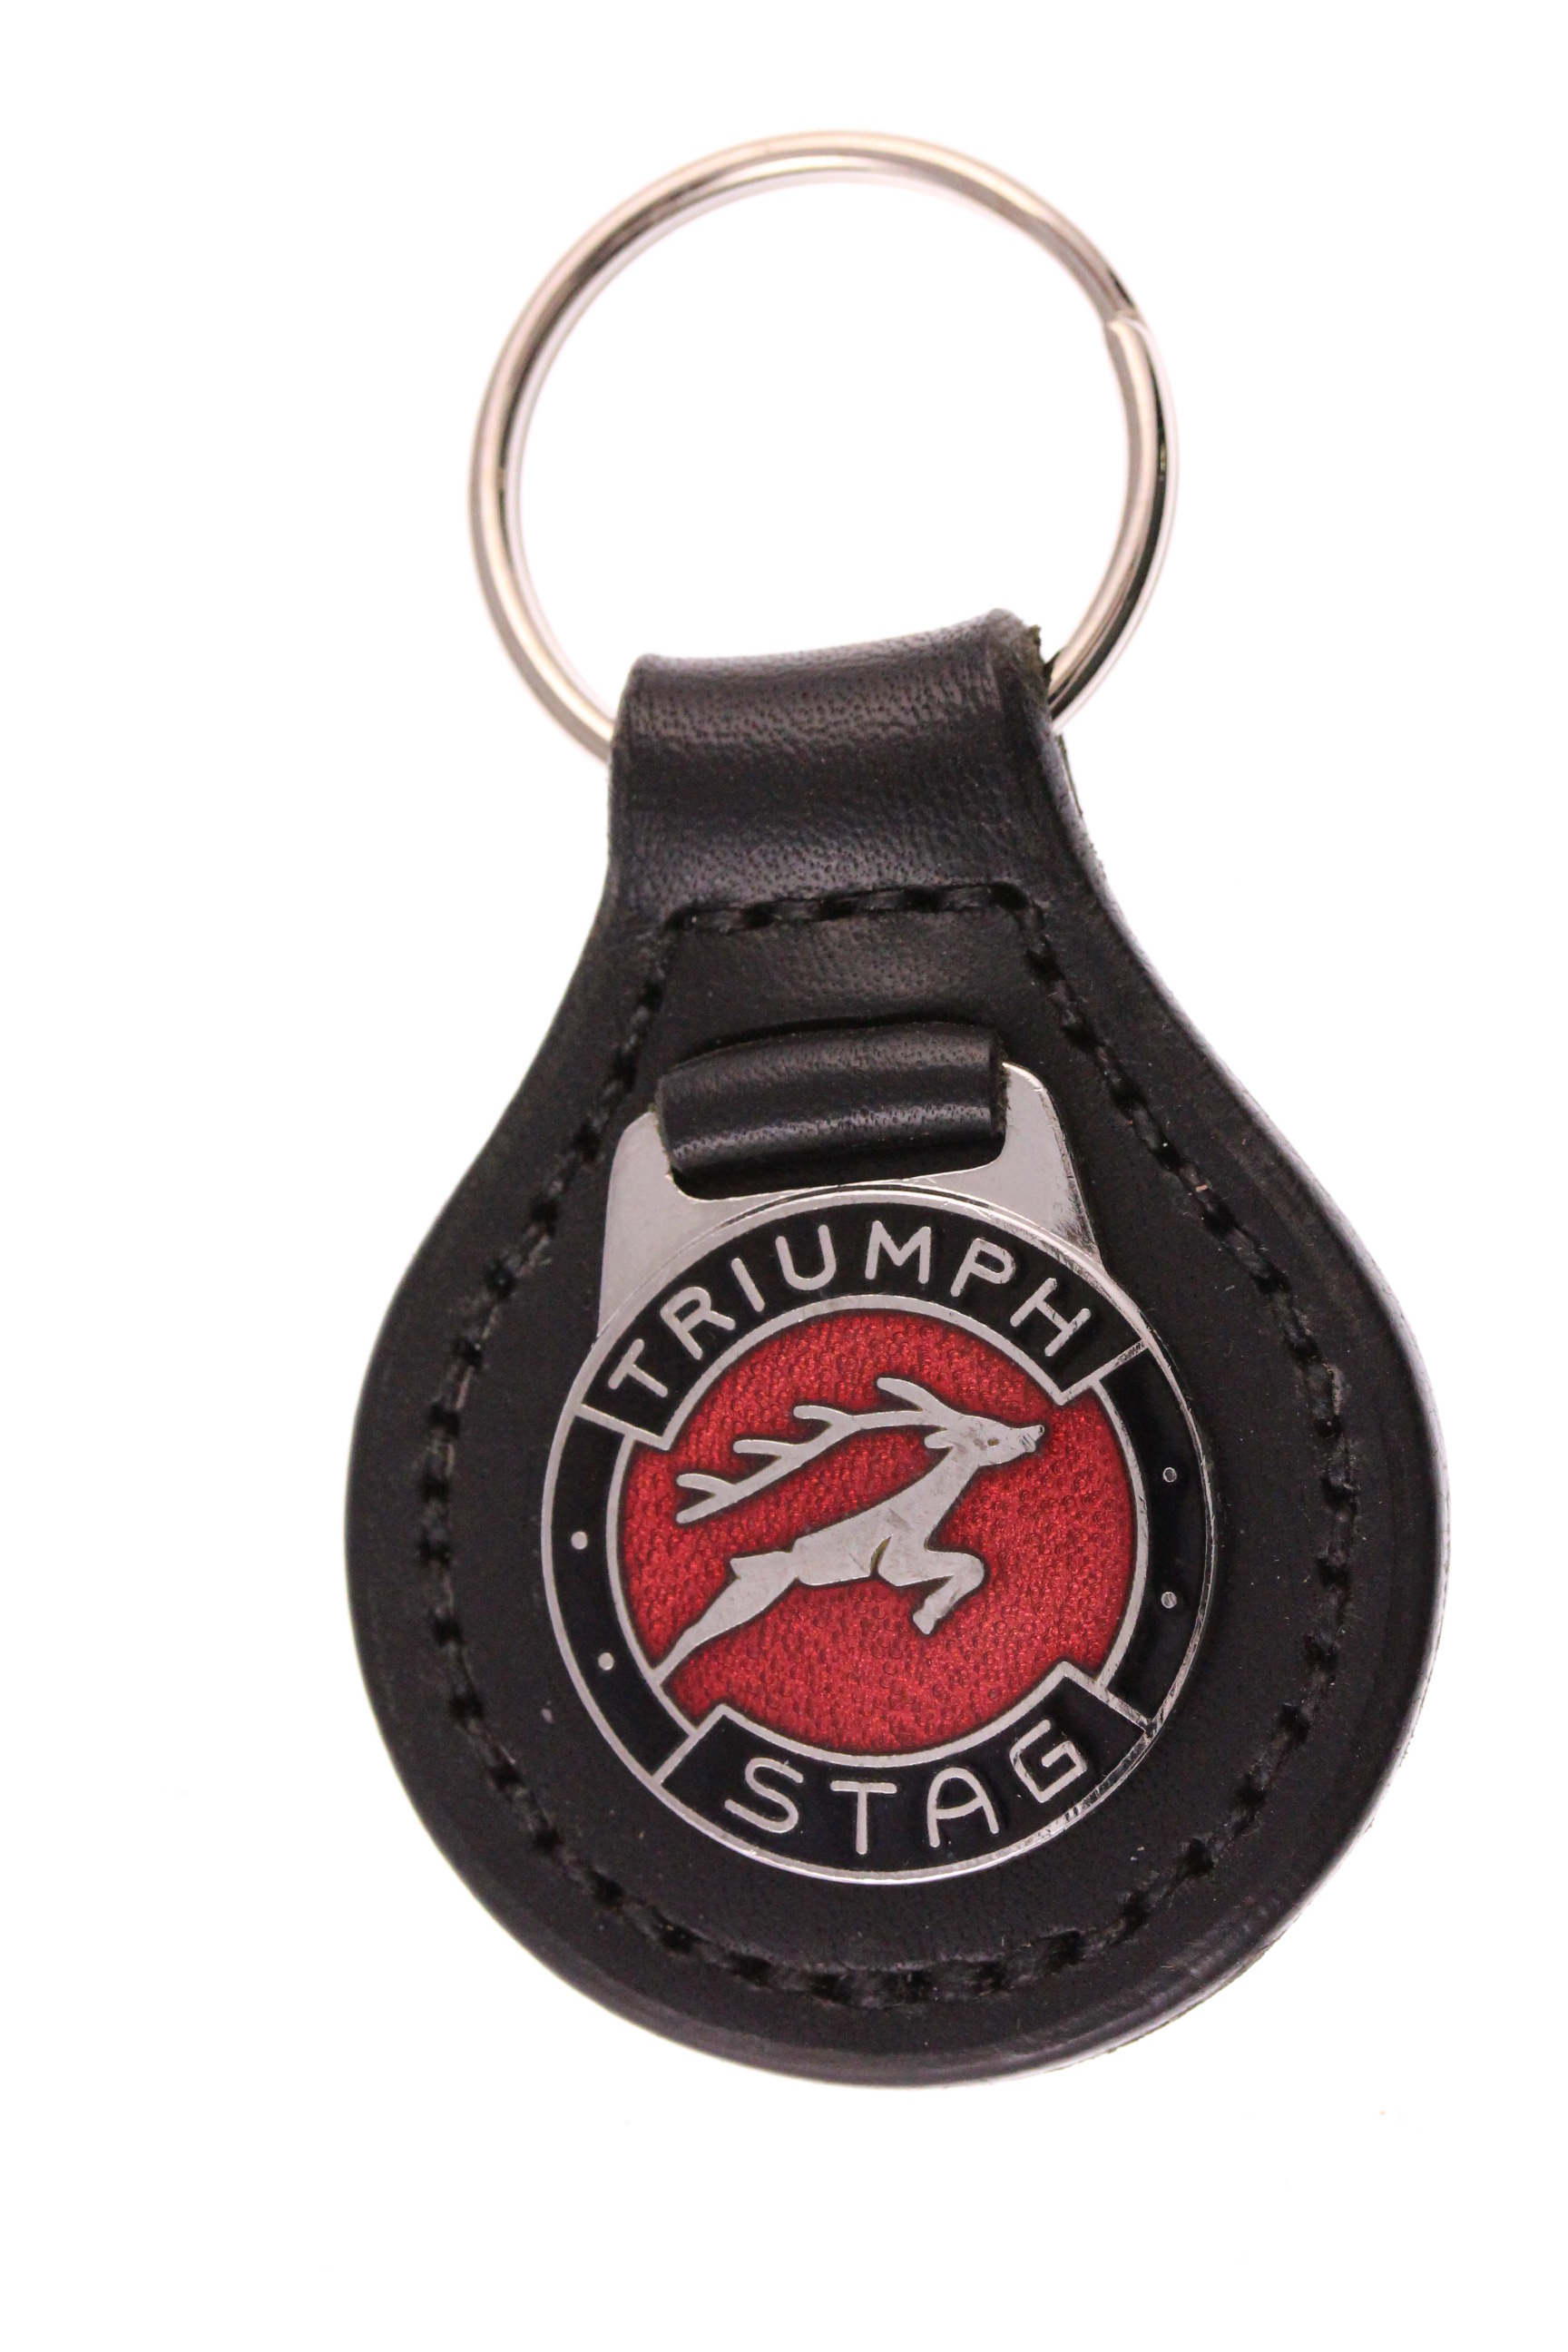 badge mounted on a leather fob Triumph Stag Keyring Key Ring